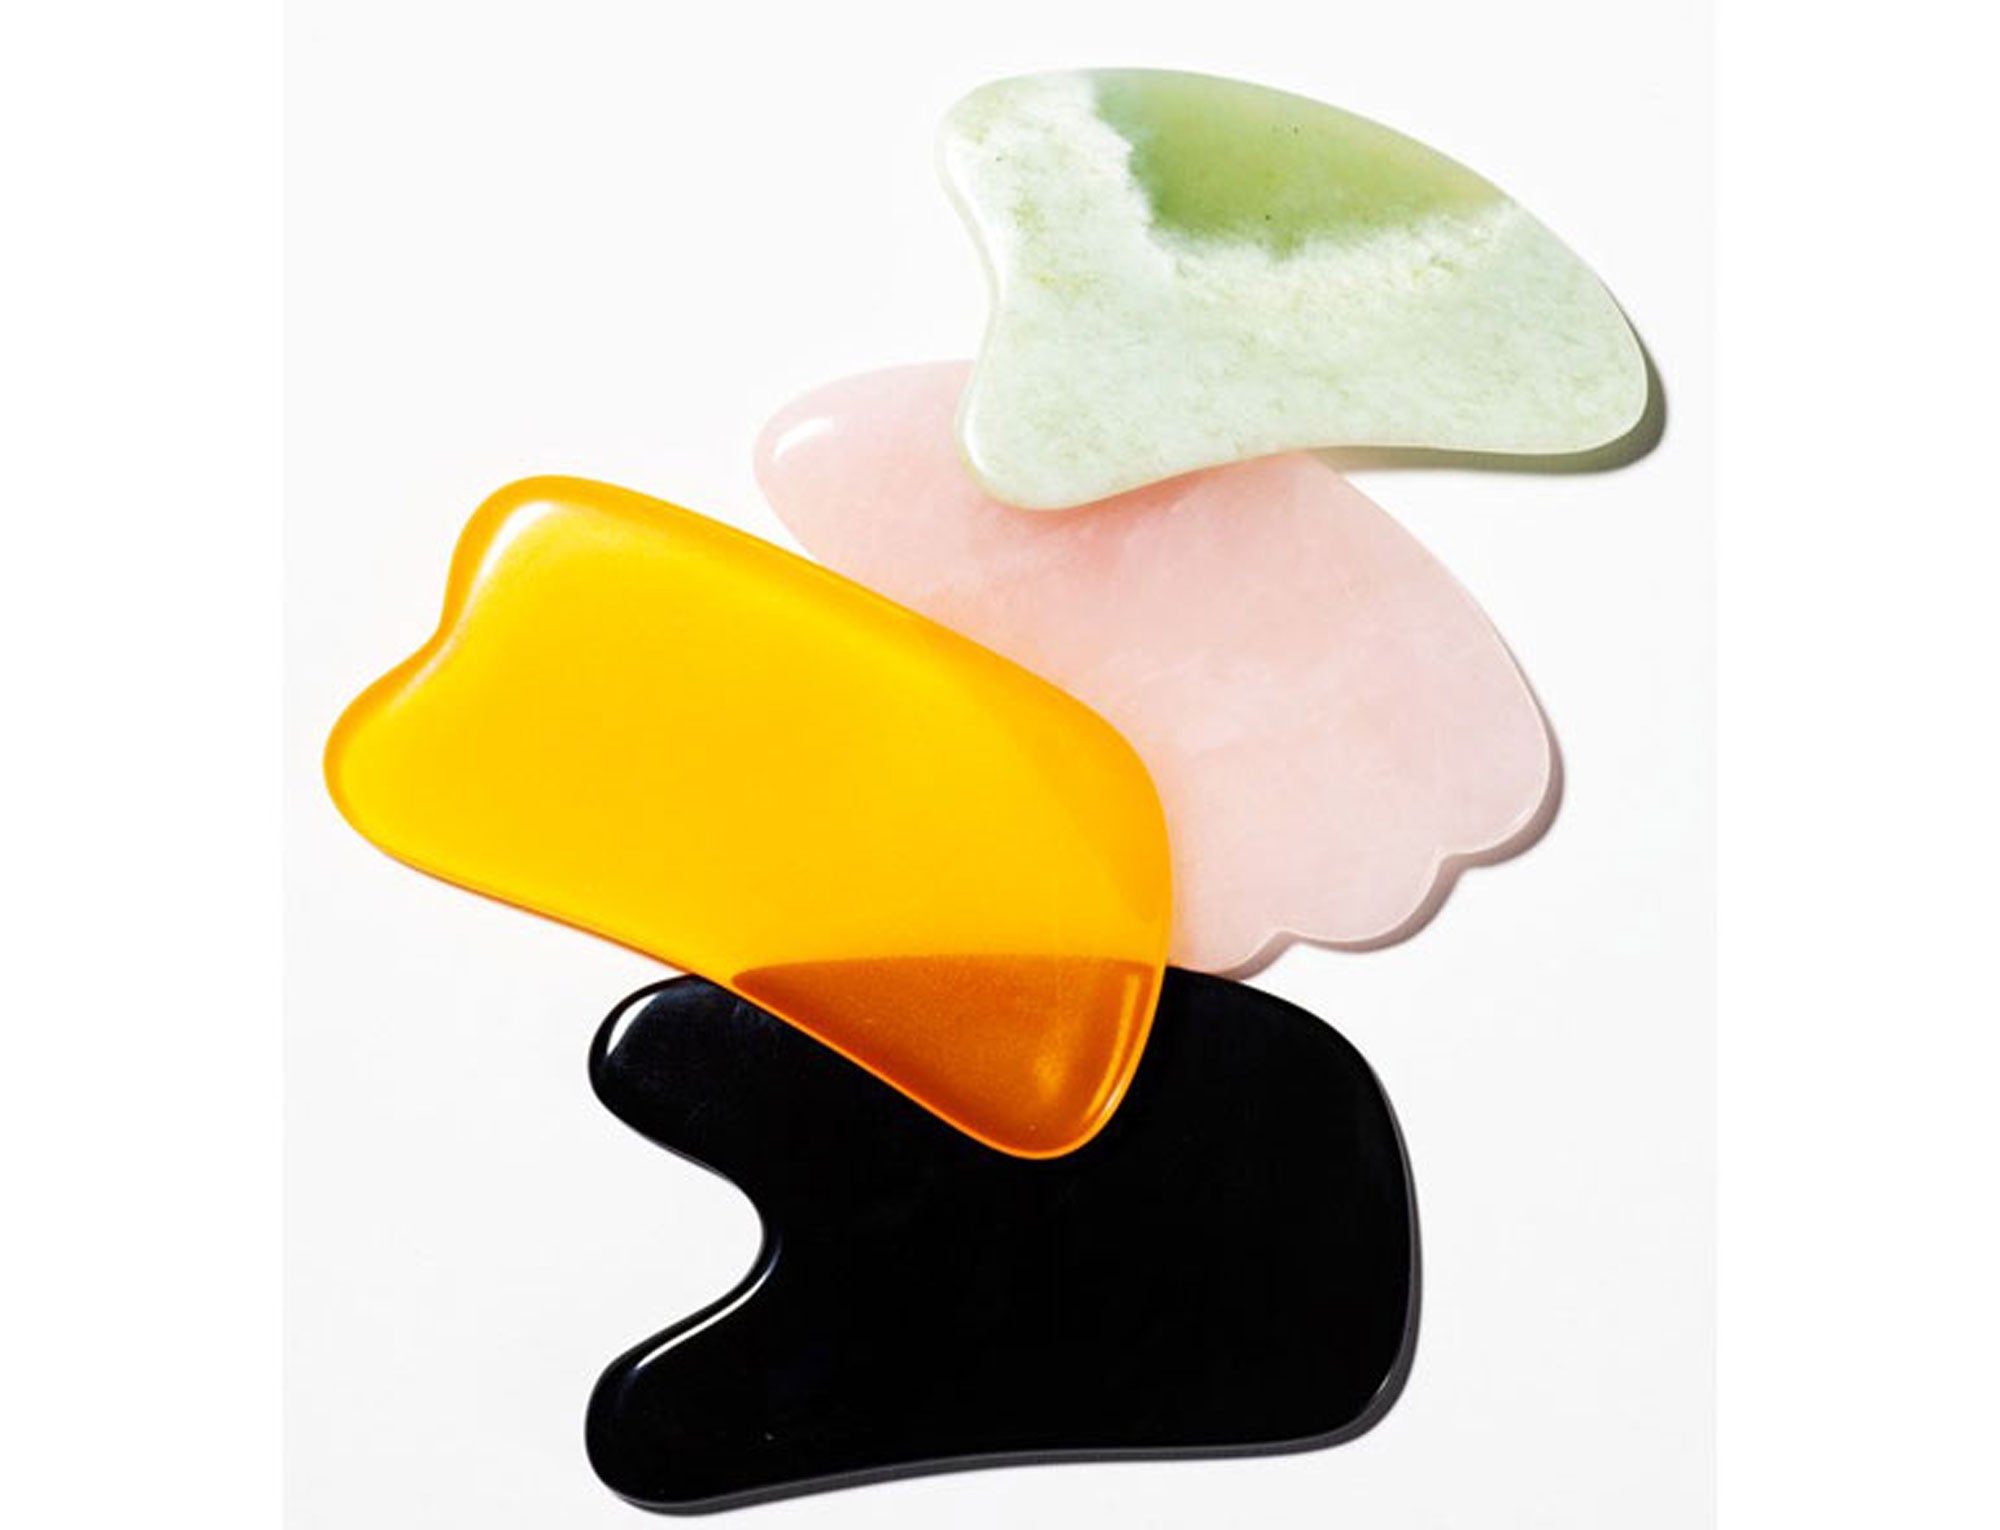 Have You Met My New Best Friend, the Gua Sha Facial Tool?